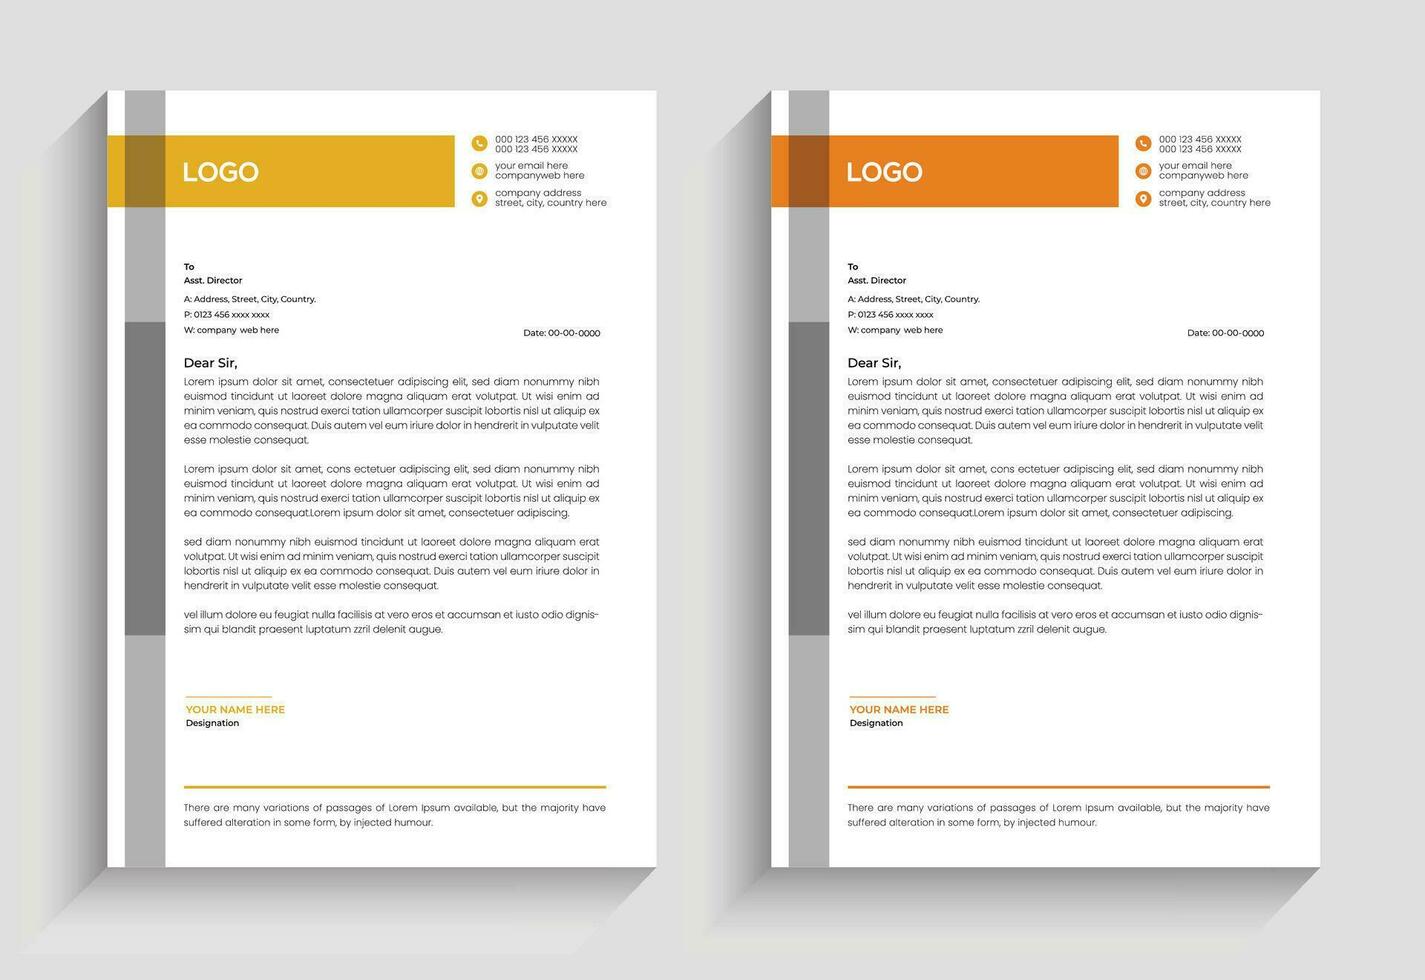 Professional corporate simple business letterhead design with Gradient luxury letterhead business document and Modern business company letterhead template, vector